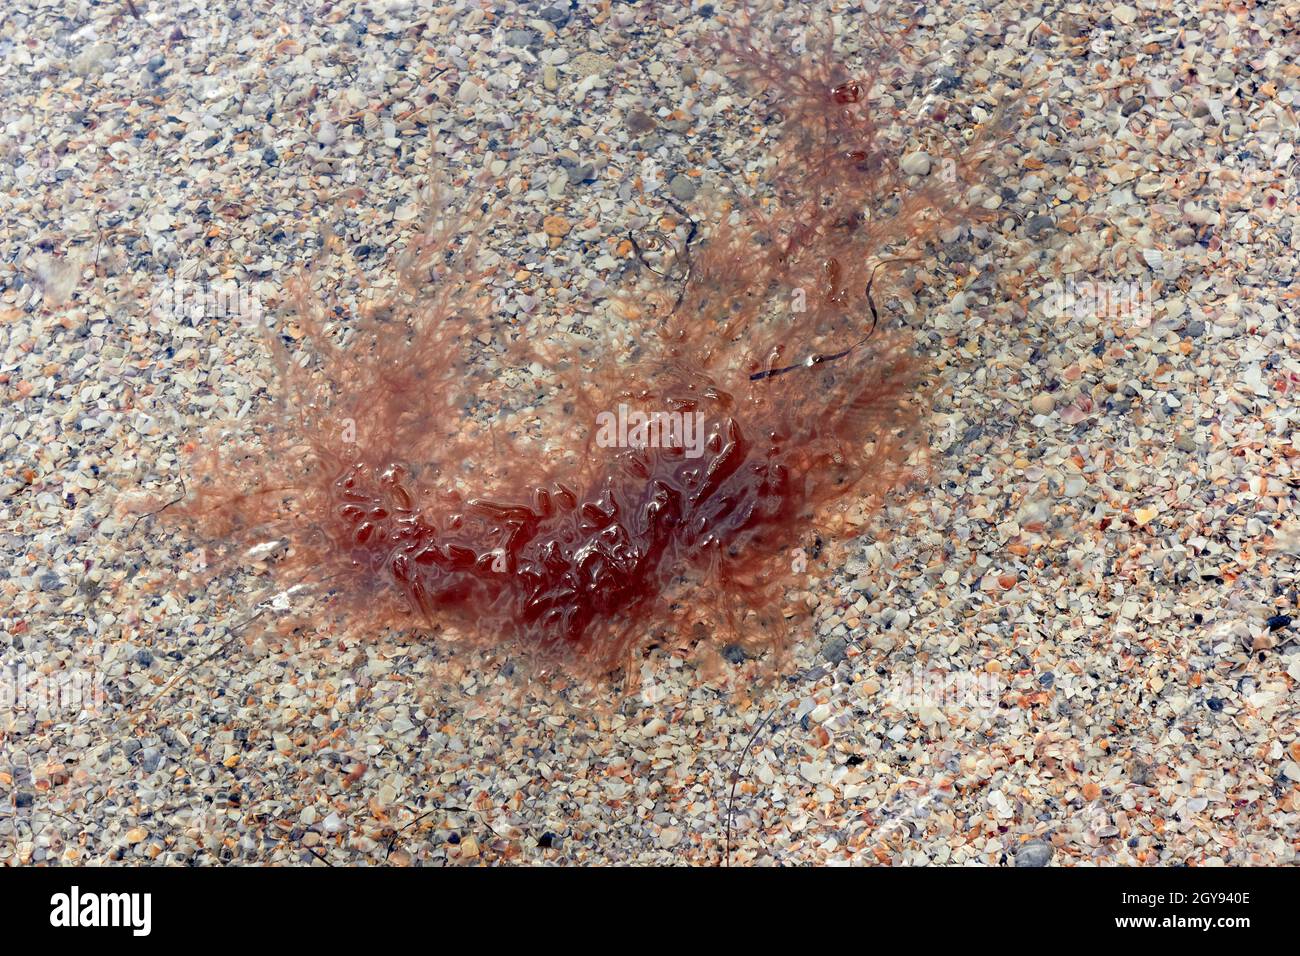 Red slimy algae swims in the sea near the shore. Shallow water and marine vegetation. The texture of orange sand, shells under clear water. Stock Photo